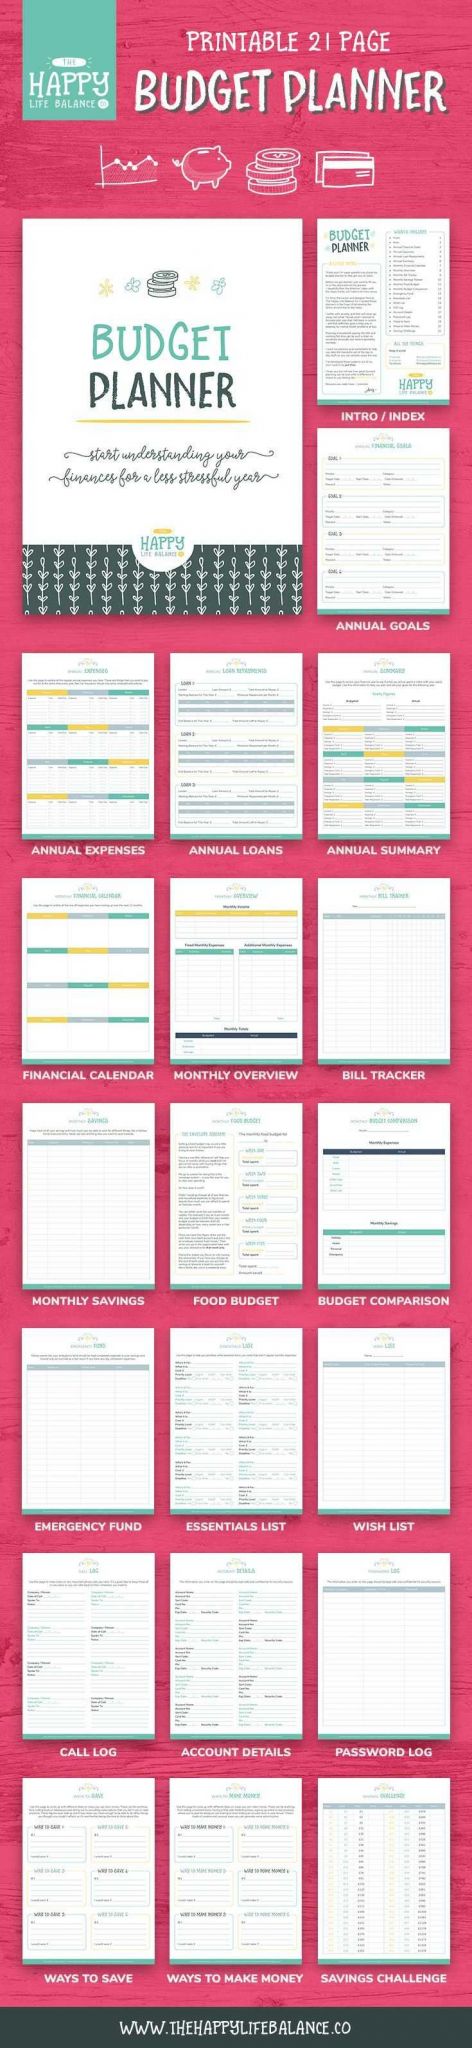 Blank Budget Worksheet Printable together with Start Understanding Your Finances with This 21 Page Bud Planner